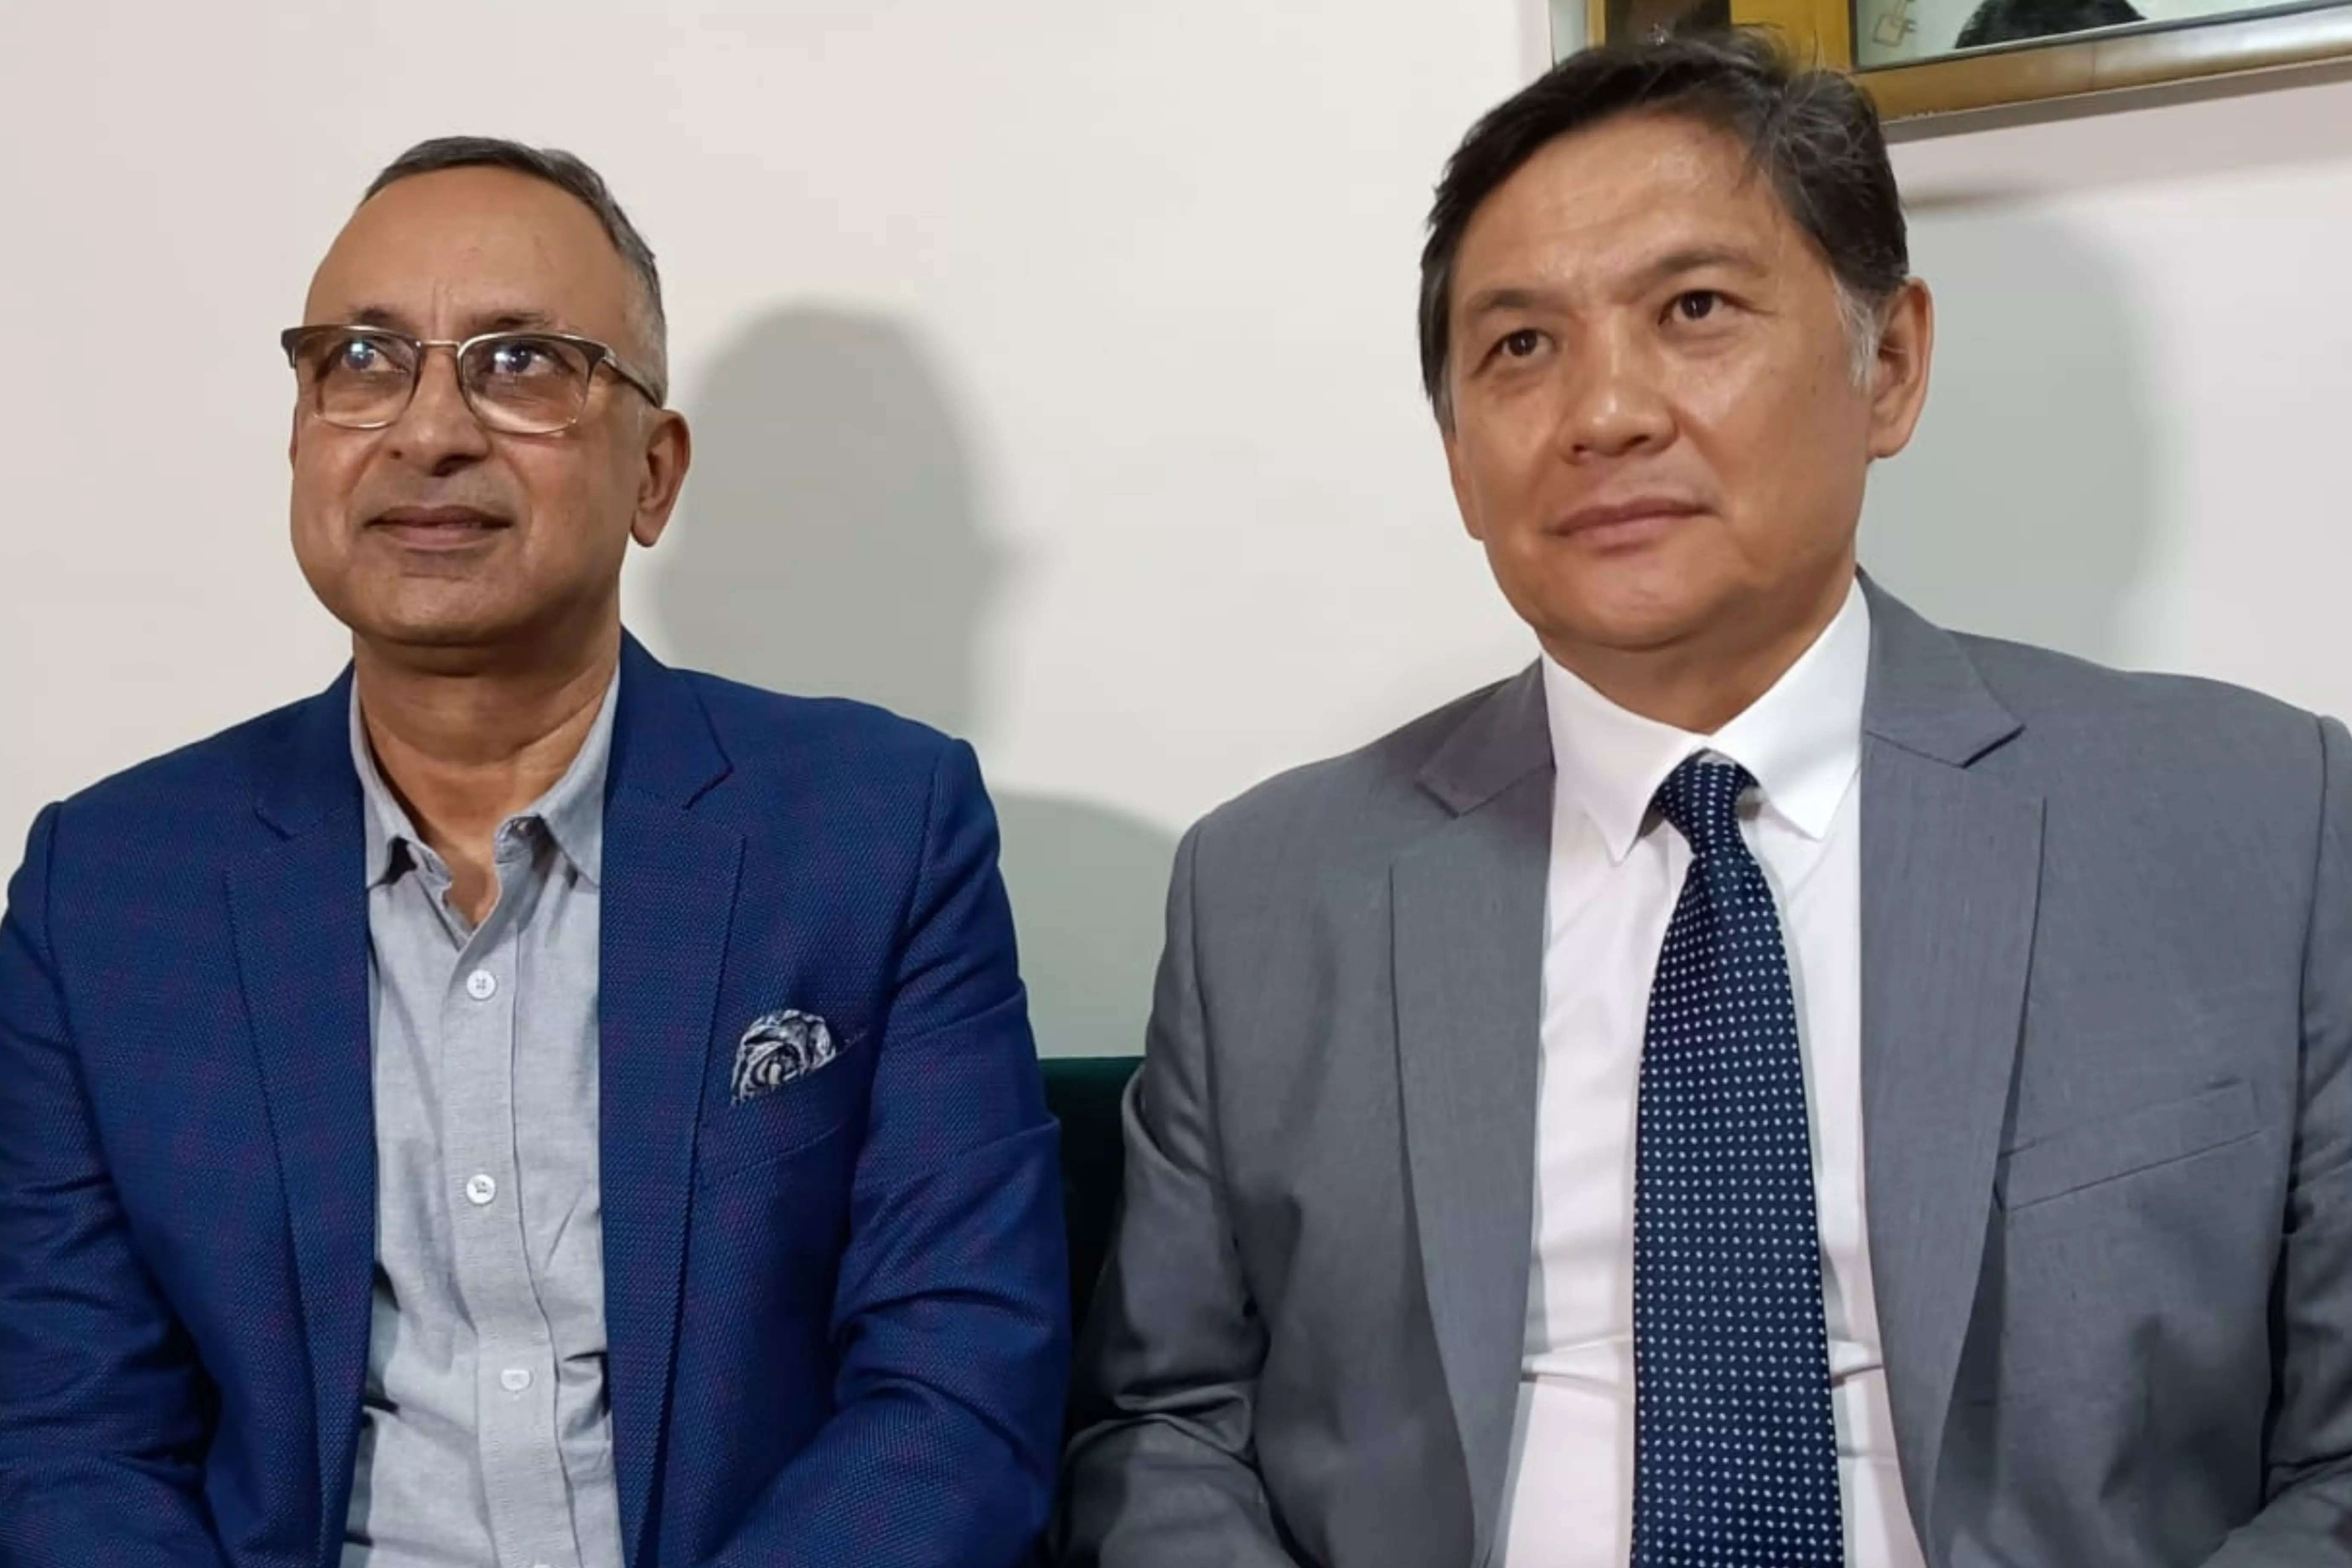   Asein Isaev, Ambassador of Kyrgyzstan in India (R) with Prashant Chaudhary, MD, Salvia VFS (L) at the launch of Kyrgyz VFS in Delhi.